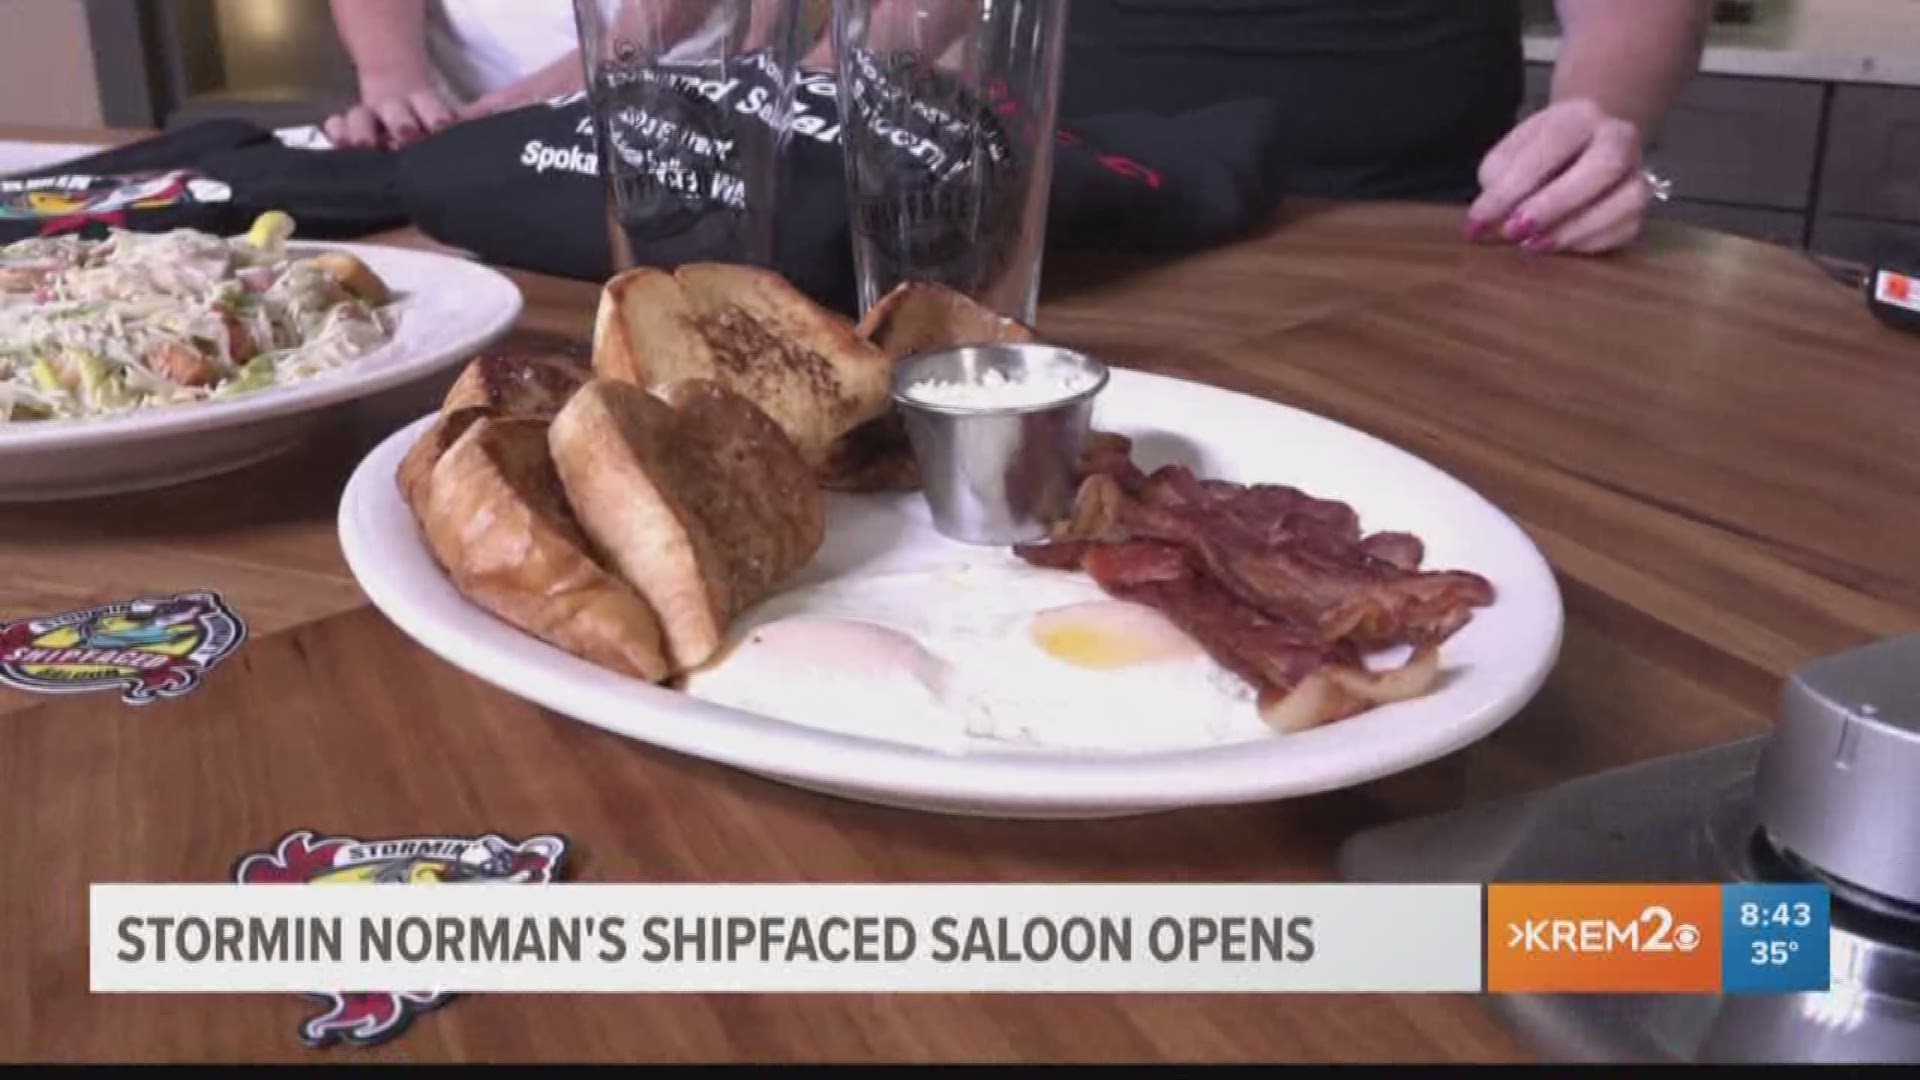 Stormin' Norman's is a sports bar and grill. The saloon just opened in Spokane.